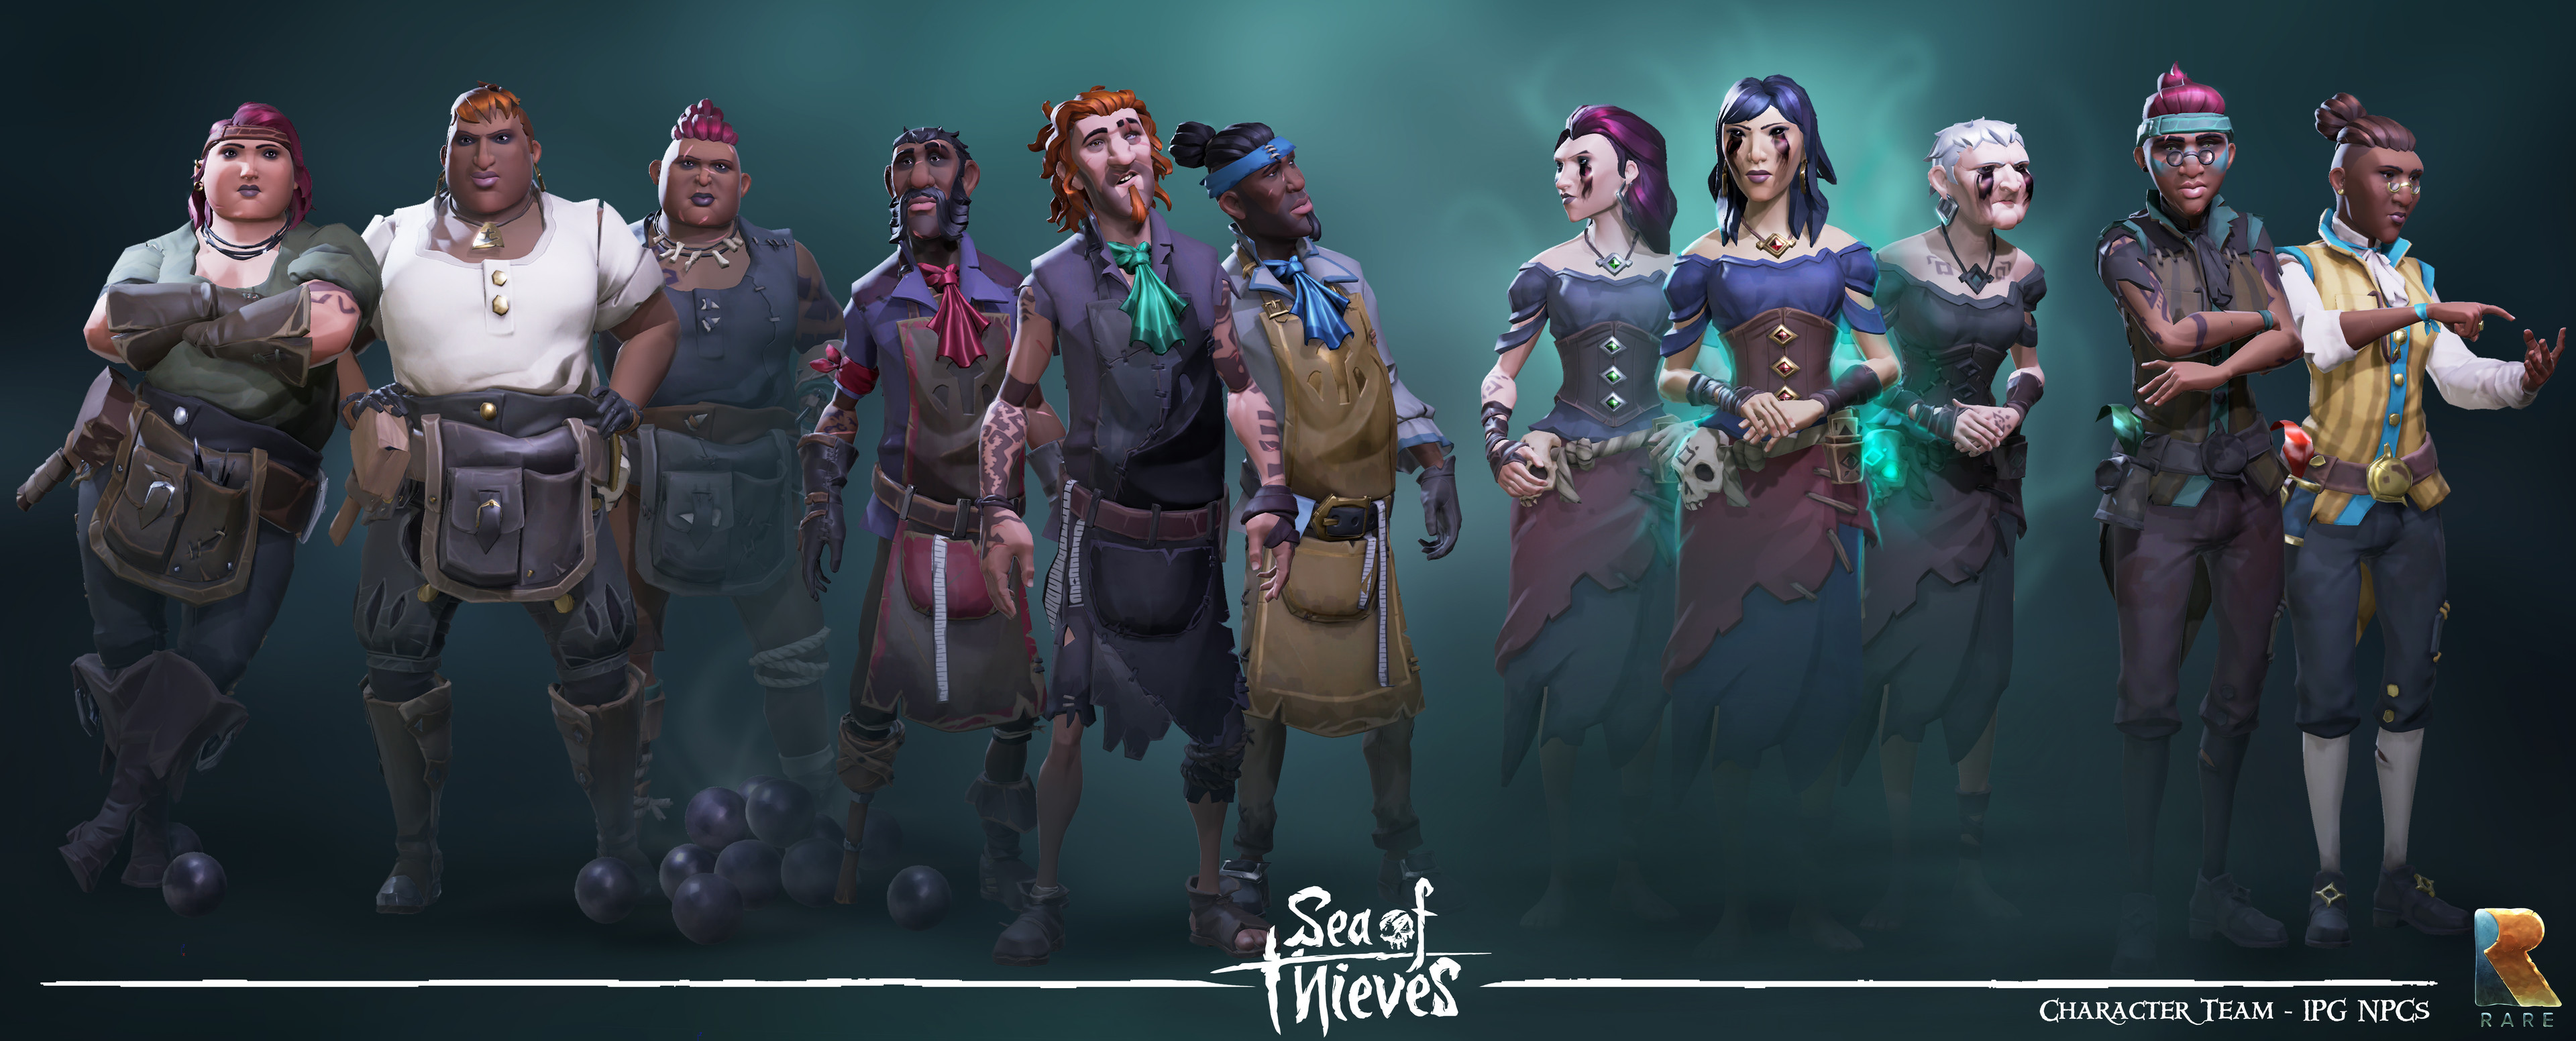 A selection of NPCs generated from the IPG.  You can see the diversity and personality of the generated characters really shine here.  All work by the Character Art team at Rare.